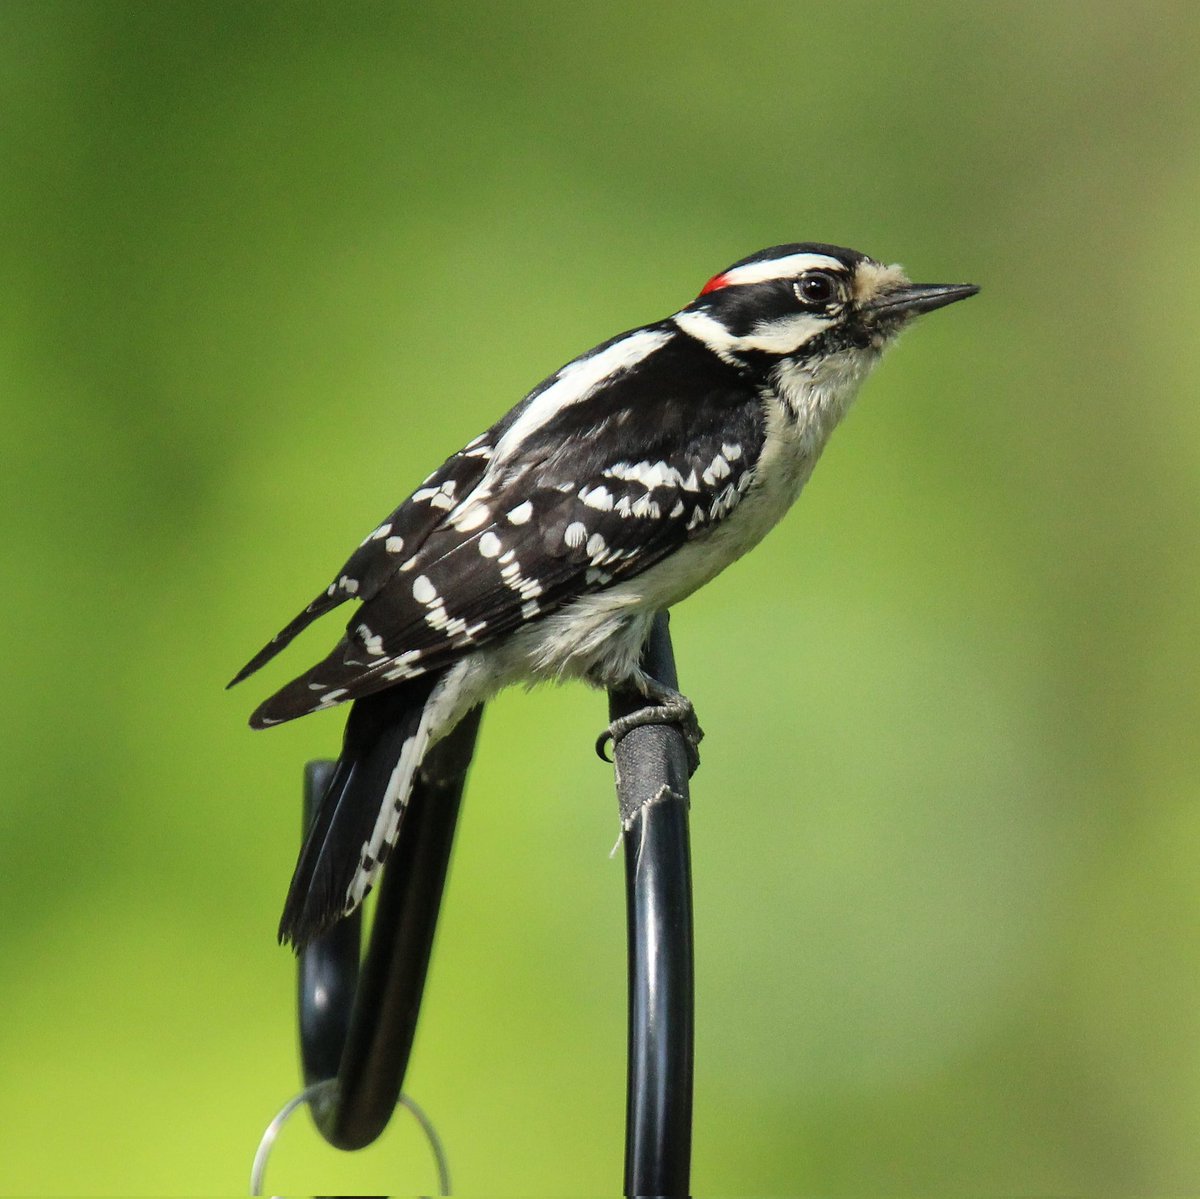 Mr. Downy's feathers are looking shiny and healthy today!
#mrdowny #downywoodpecker #downywoodpeckers #birds #birdsonearth #woodpecker #woodpeckers #cutewoodpecker #shiny #healthy #birding #bird #ohiobirding #ohiobirder #birder #birdphoto #birdlife #birdworld #birdwatchers_daily